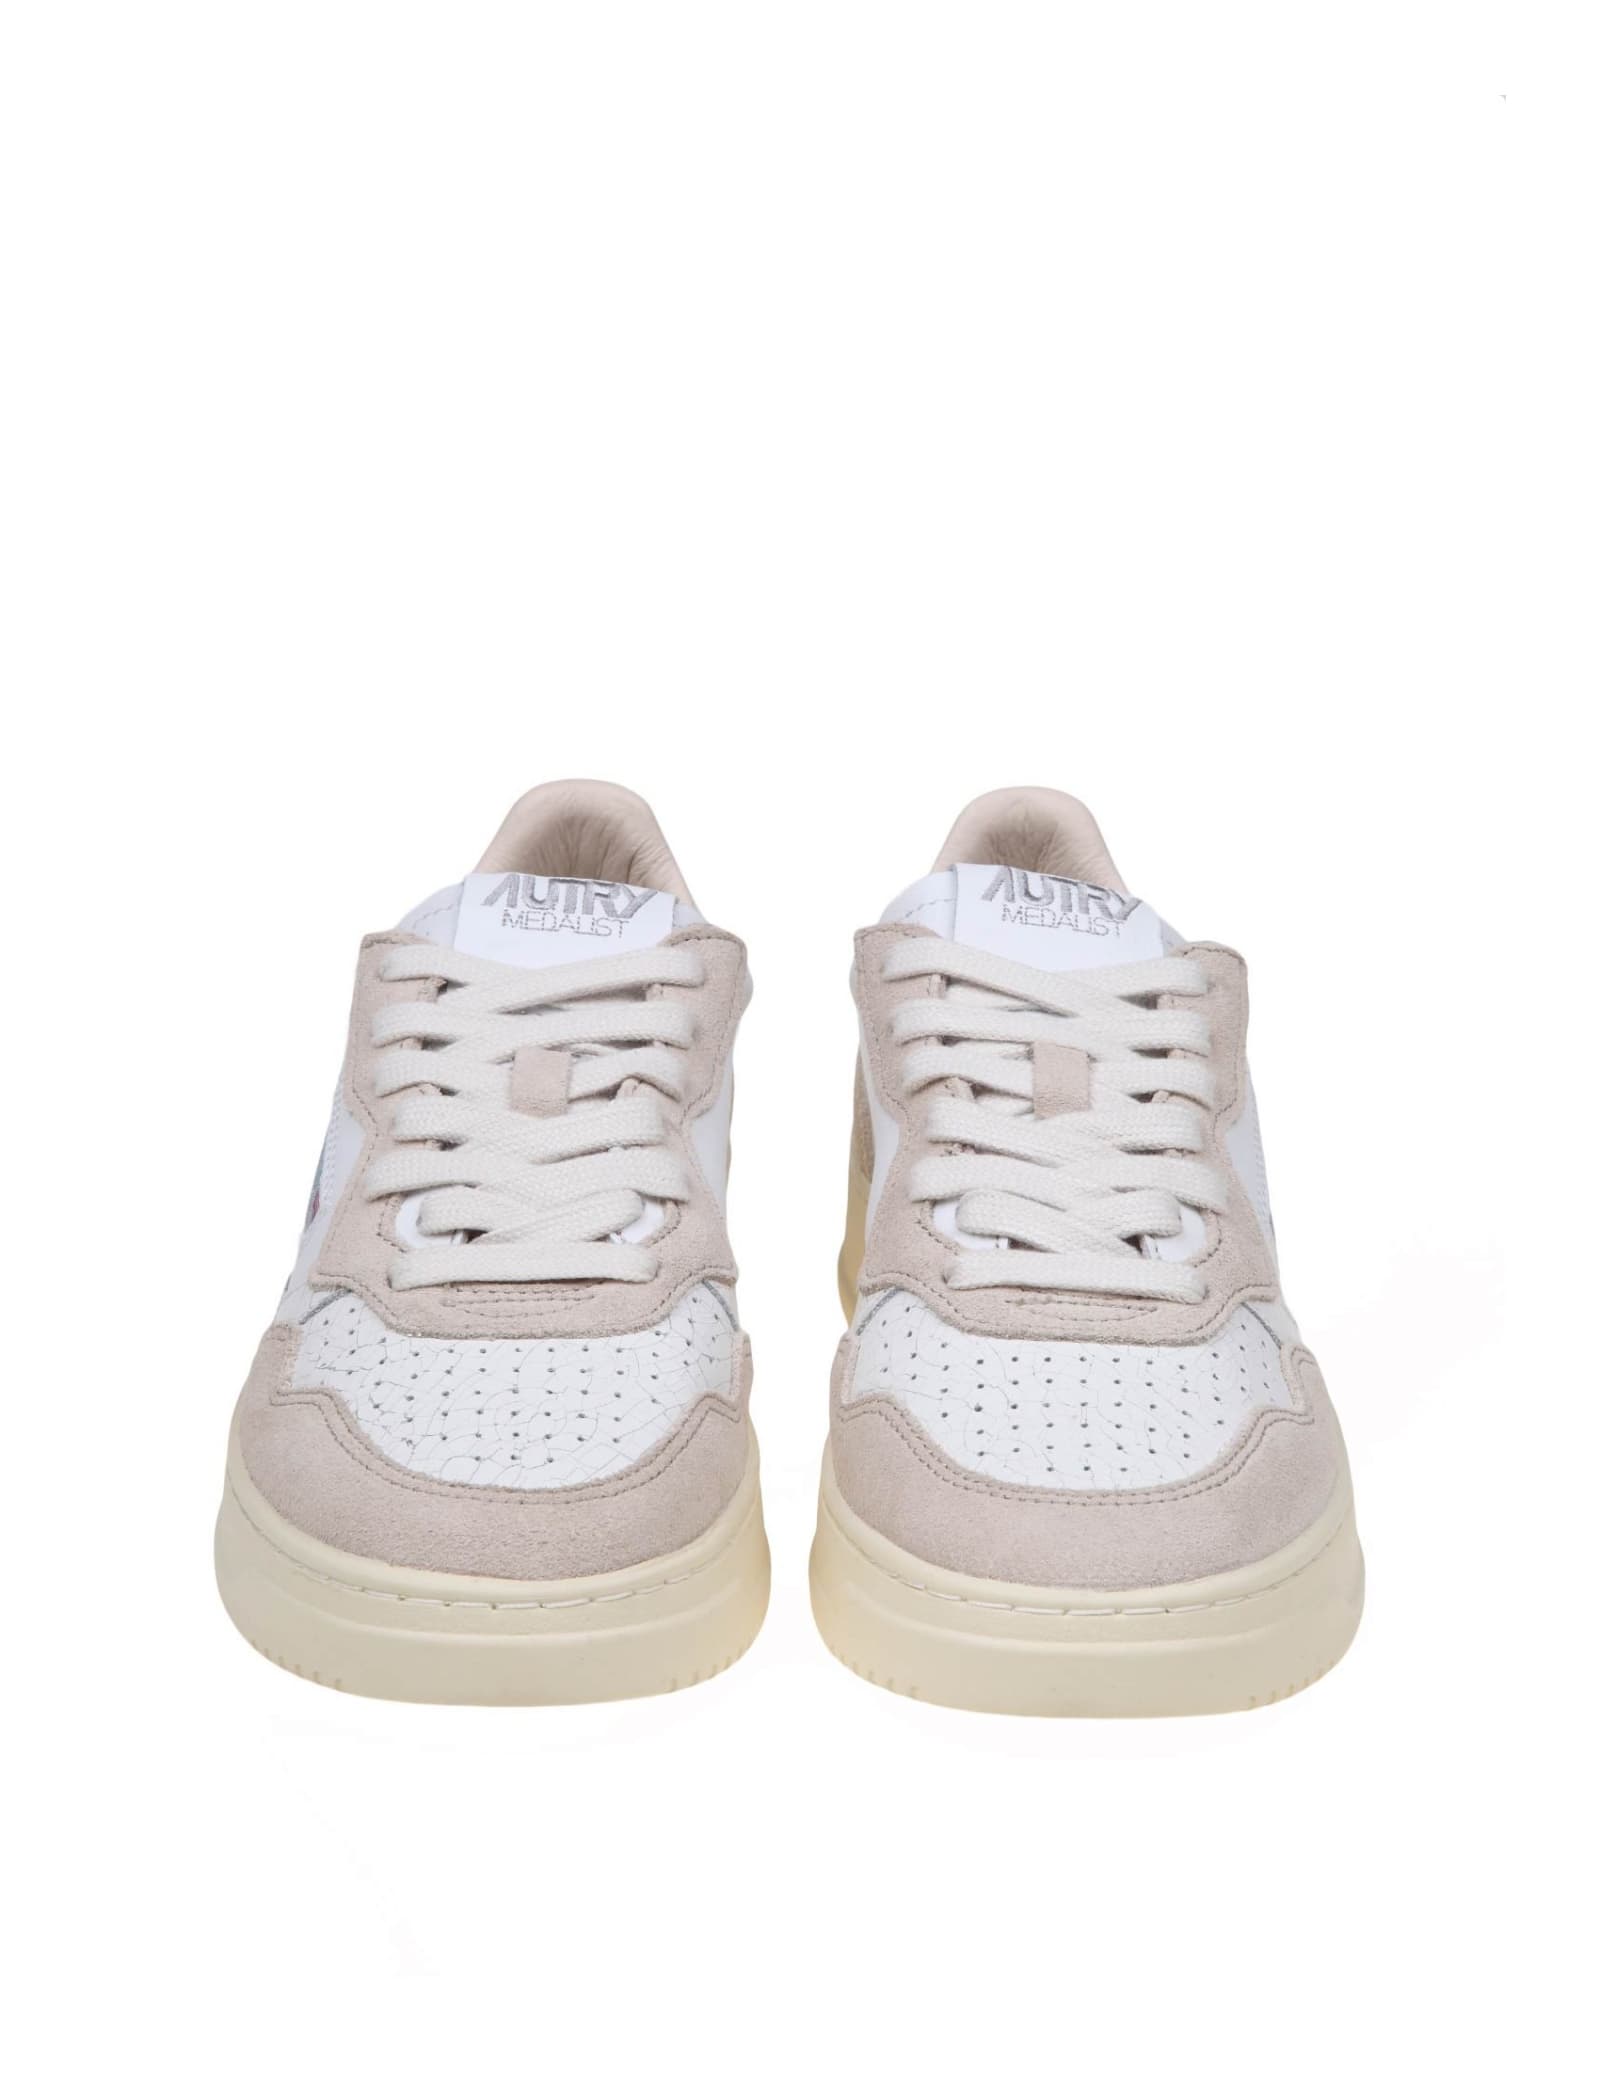 Shop Autry Sneakers In White And Sand Leather And Suede In Beige